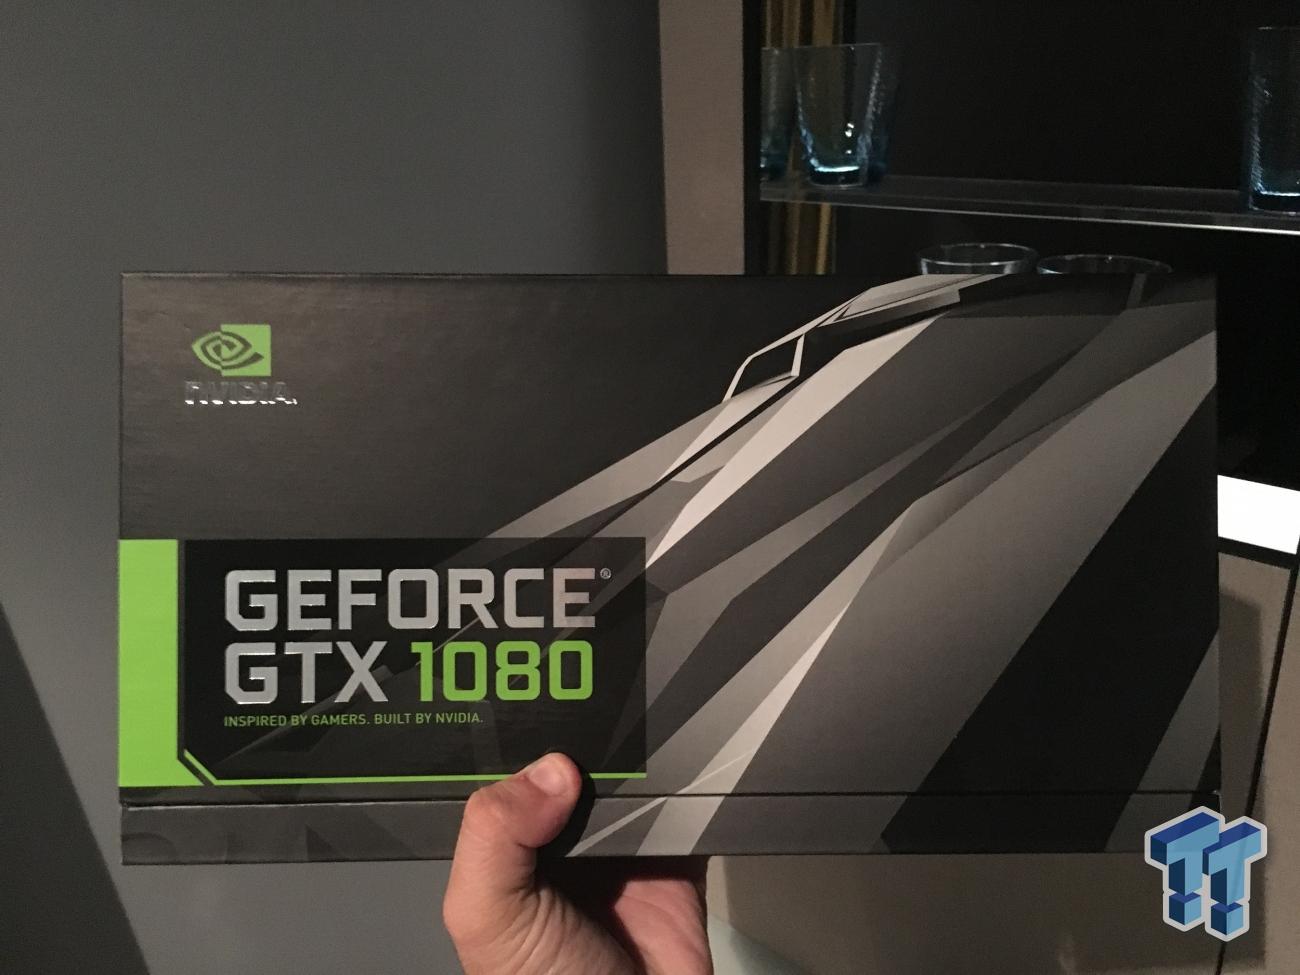 Can AMD beat the new NVIDIA GeForce GTX 1080 video card? Probably not.